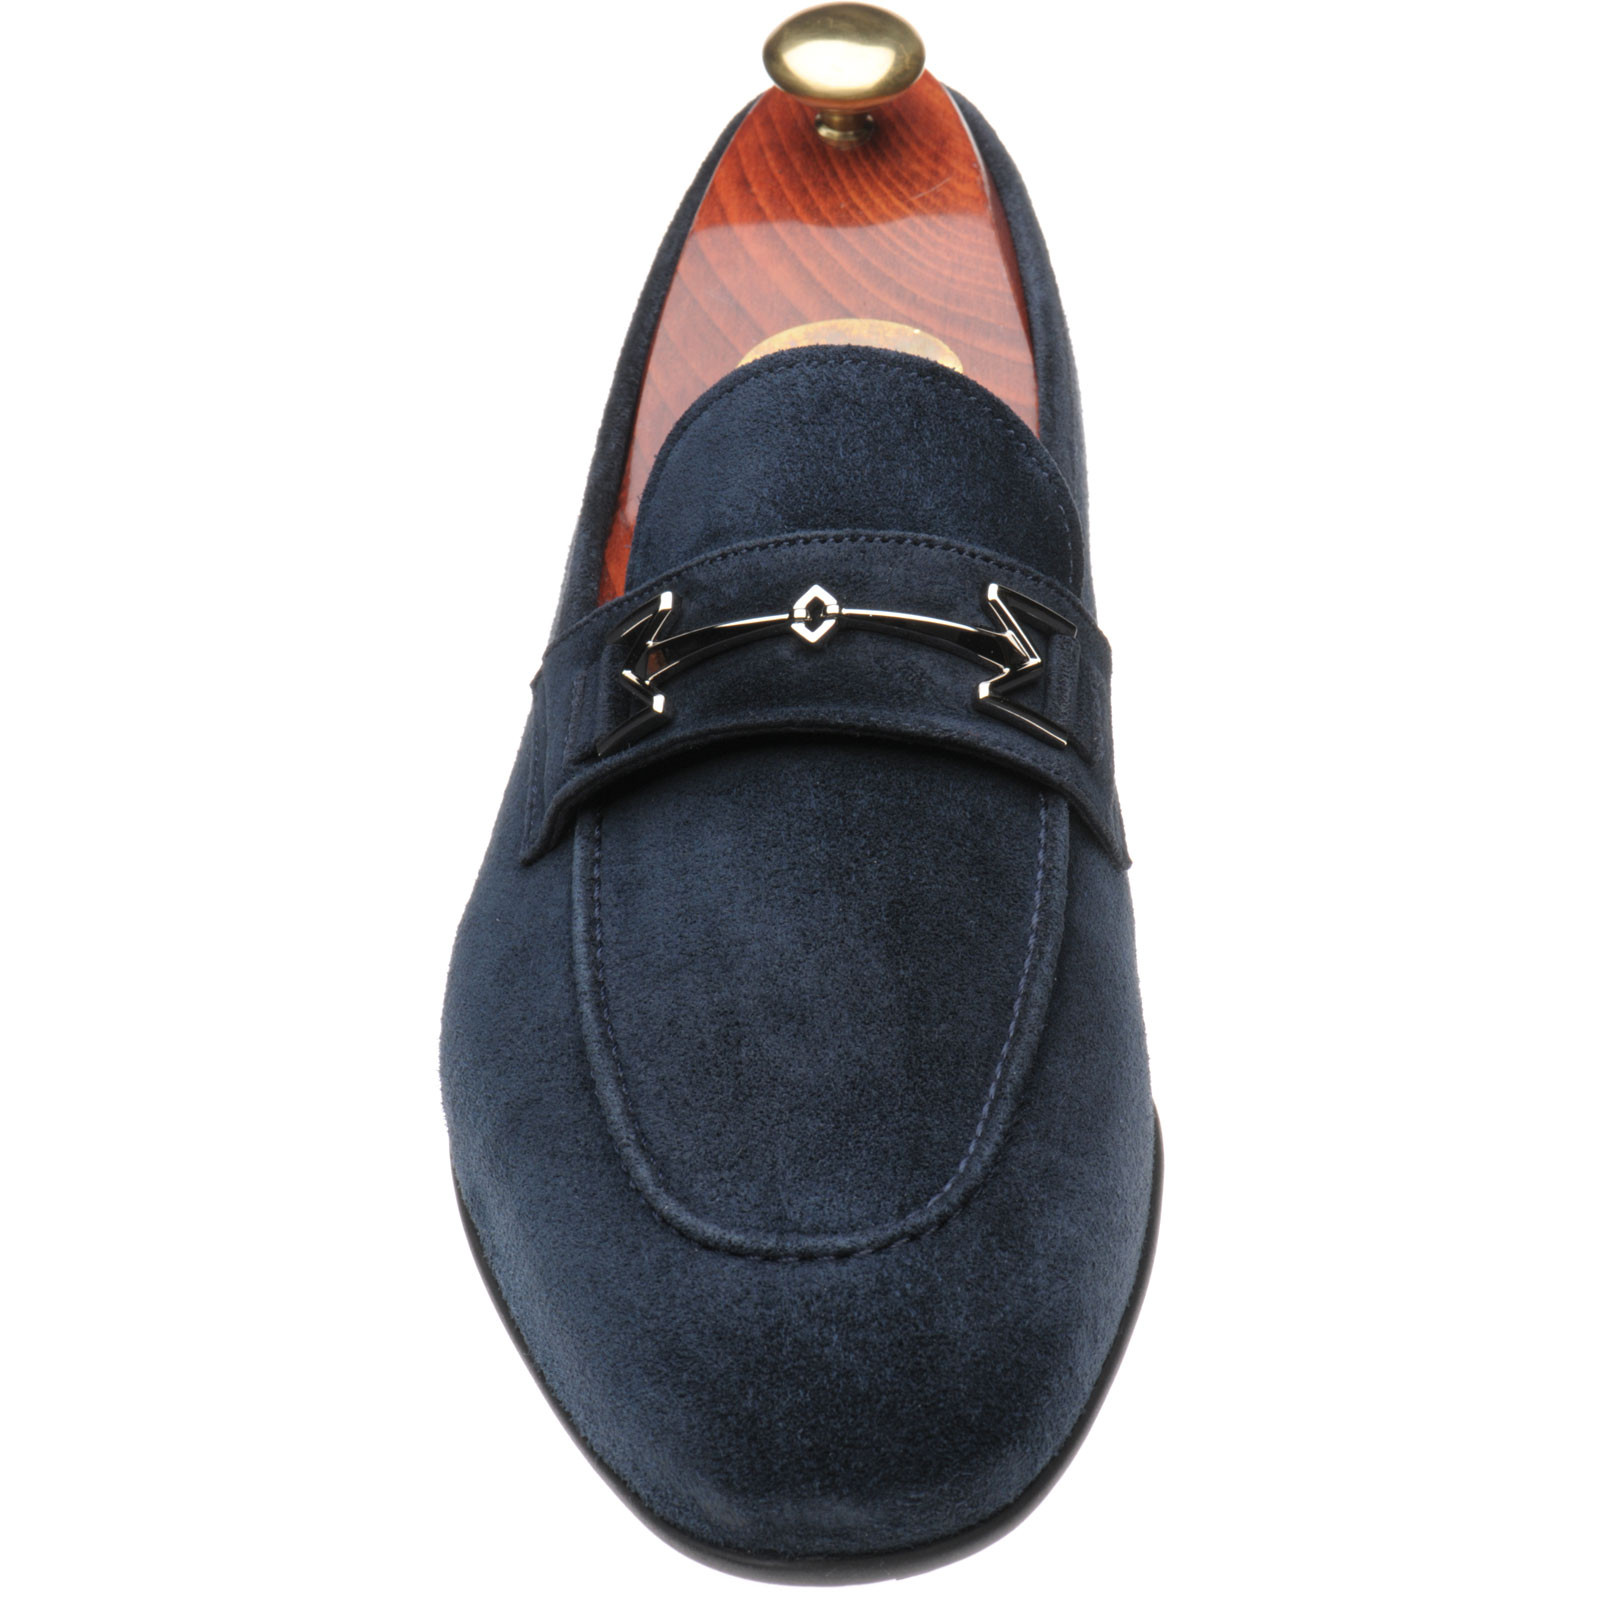 Moreschi shoes | Moreschi Sale | Peach rubber-soled loafers in Navy ...